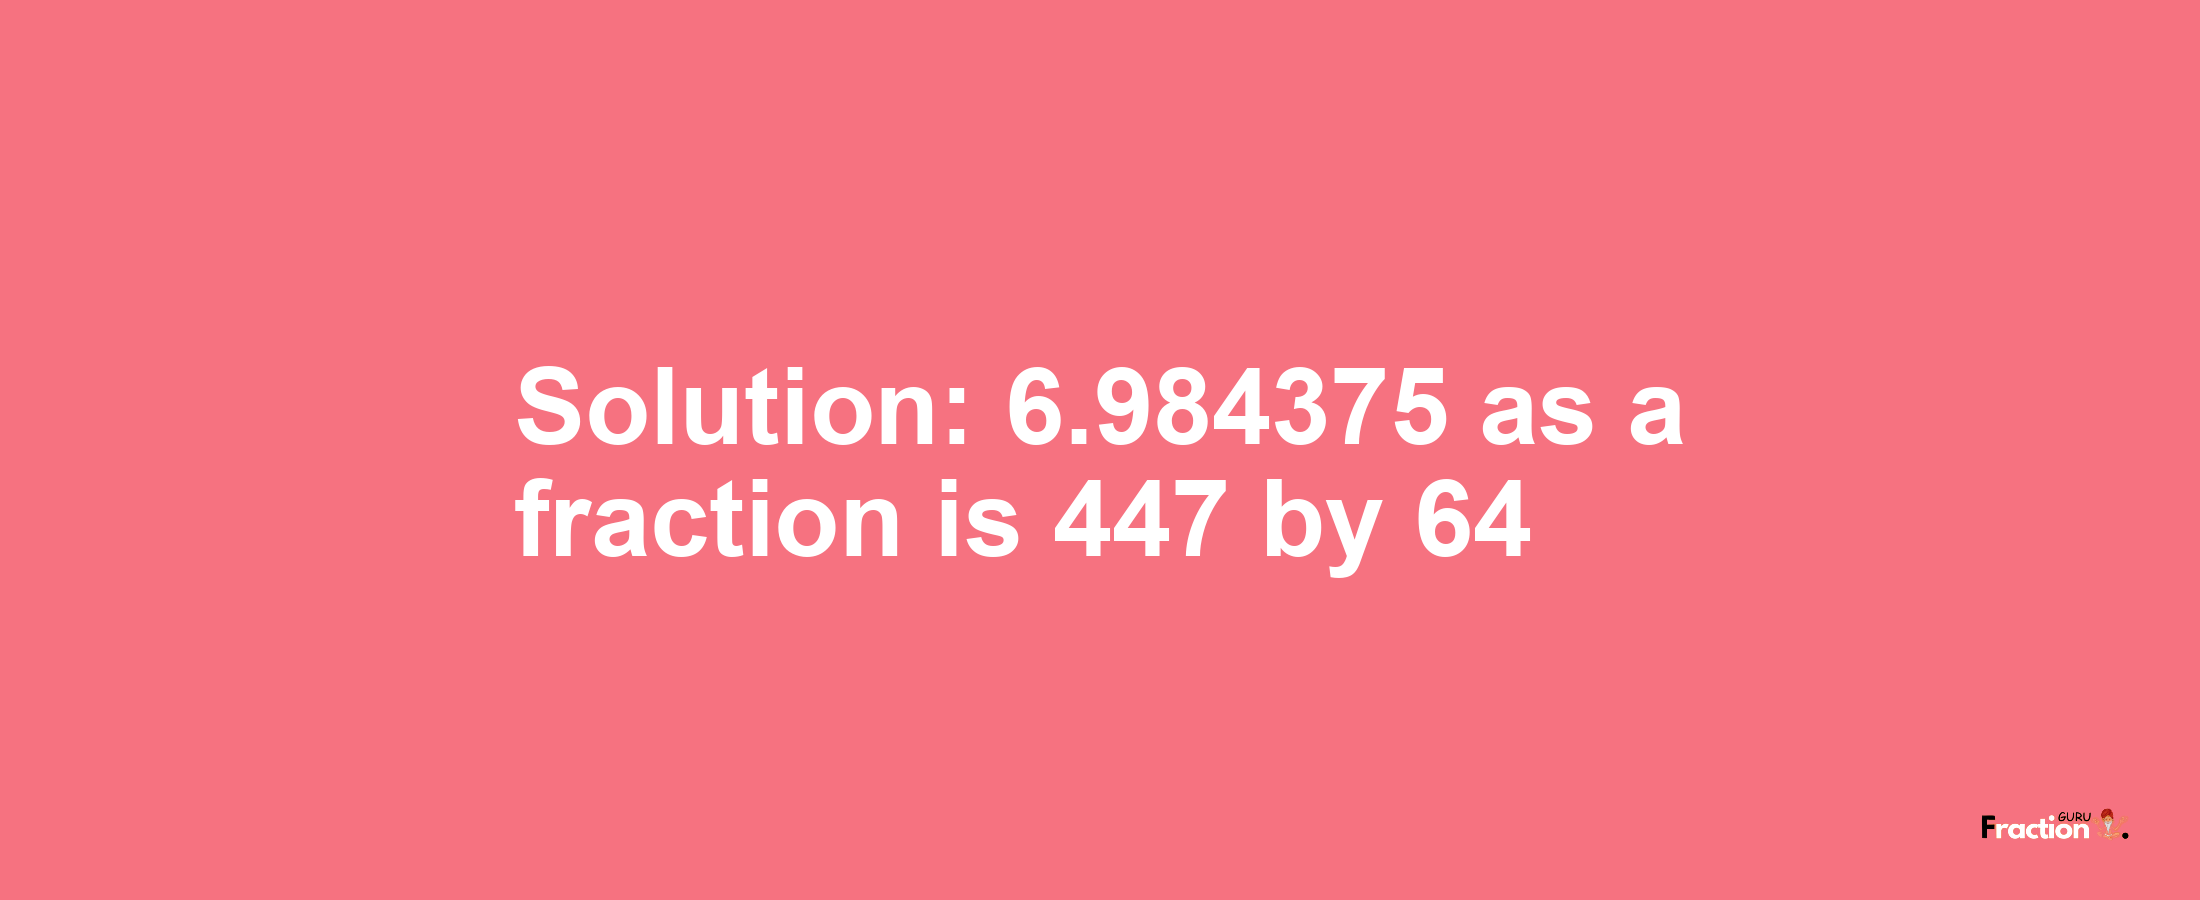 Solution:6.984375 as a fraction is 447/64